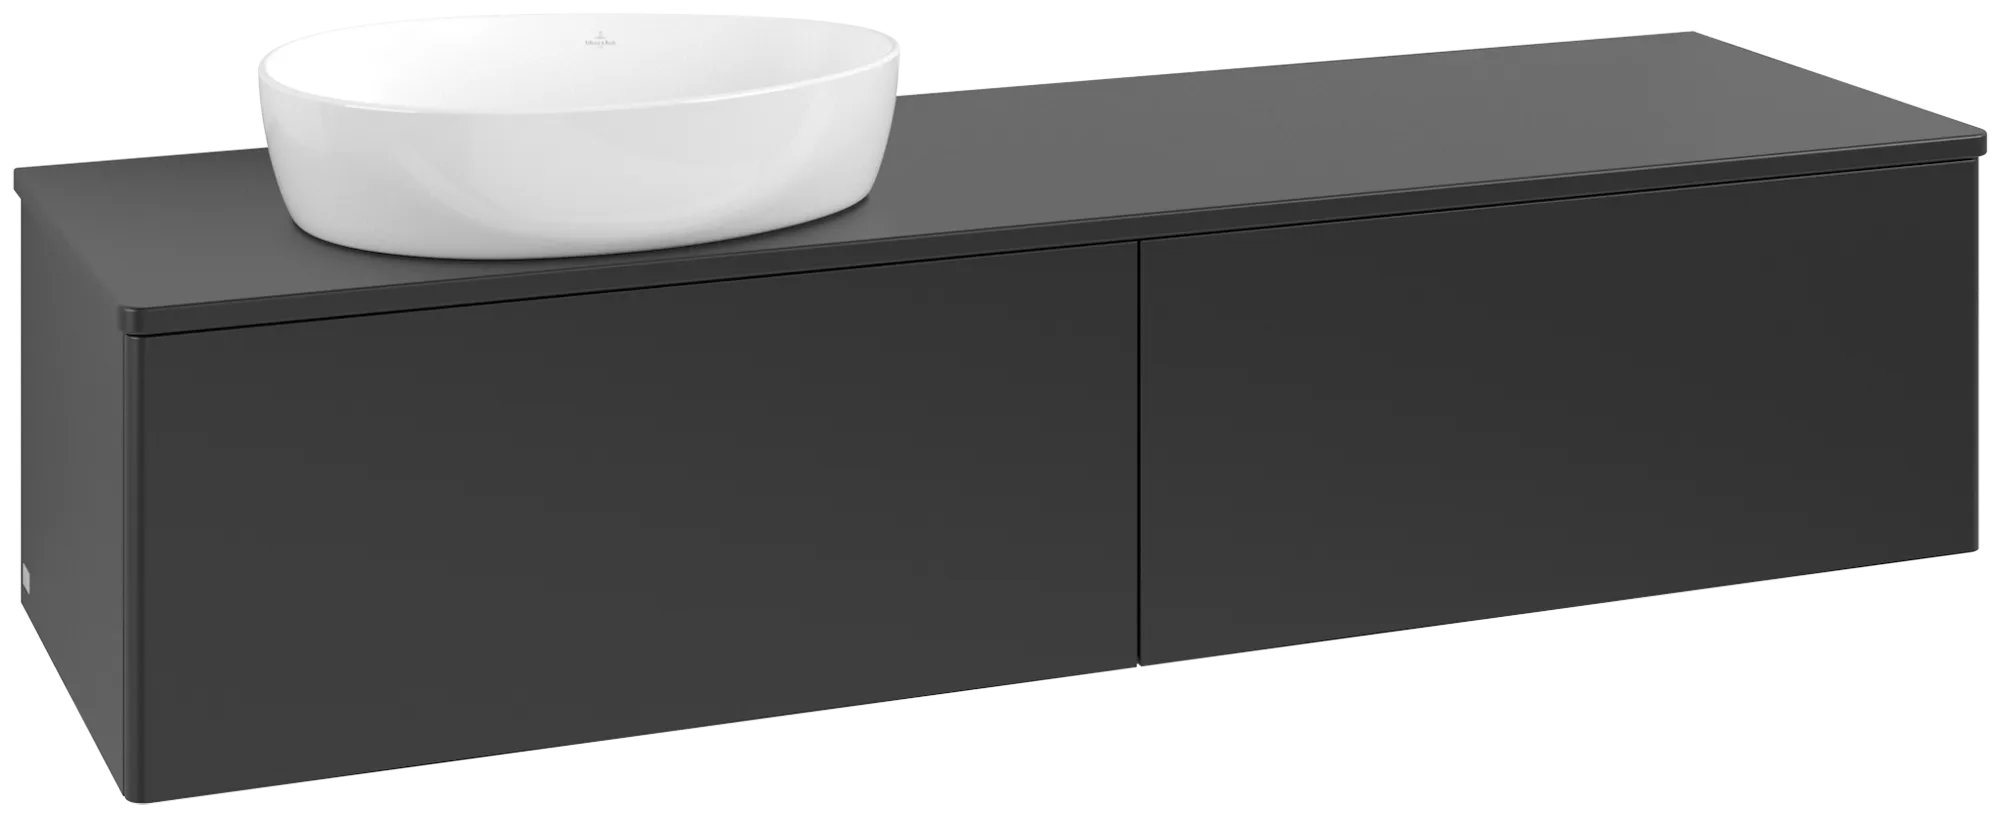 VILLEROY BOCH Antao Vanity unit, with lighting, 2 pull-out compartments, 1600 x 360 x 500 mm, Front without structure, Black Matt Lacquer / Black Matt Lacquer #L37010PD resmi